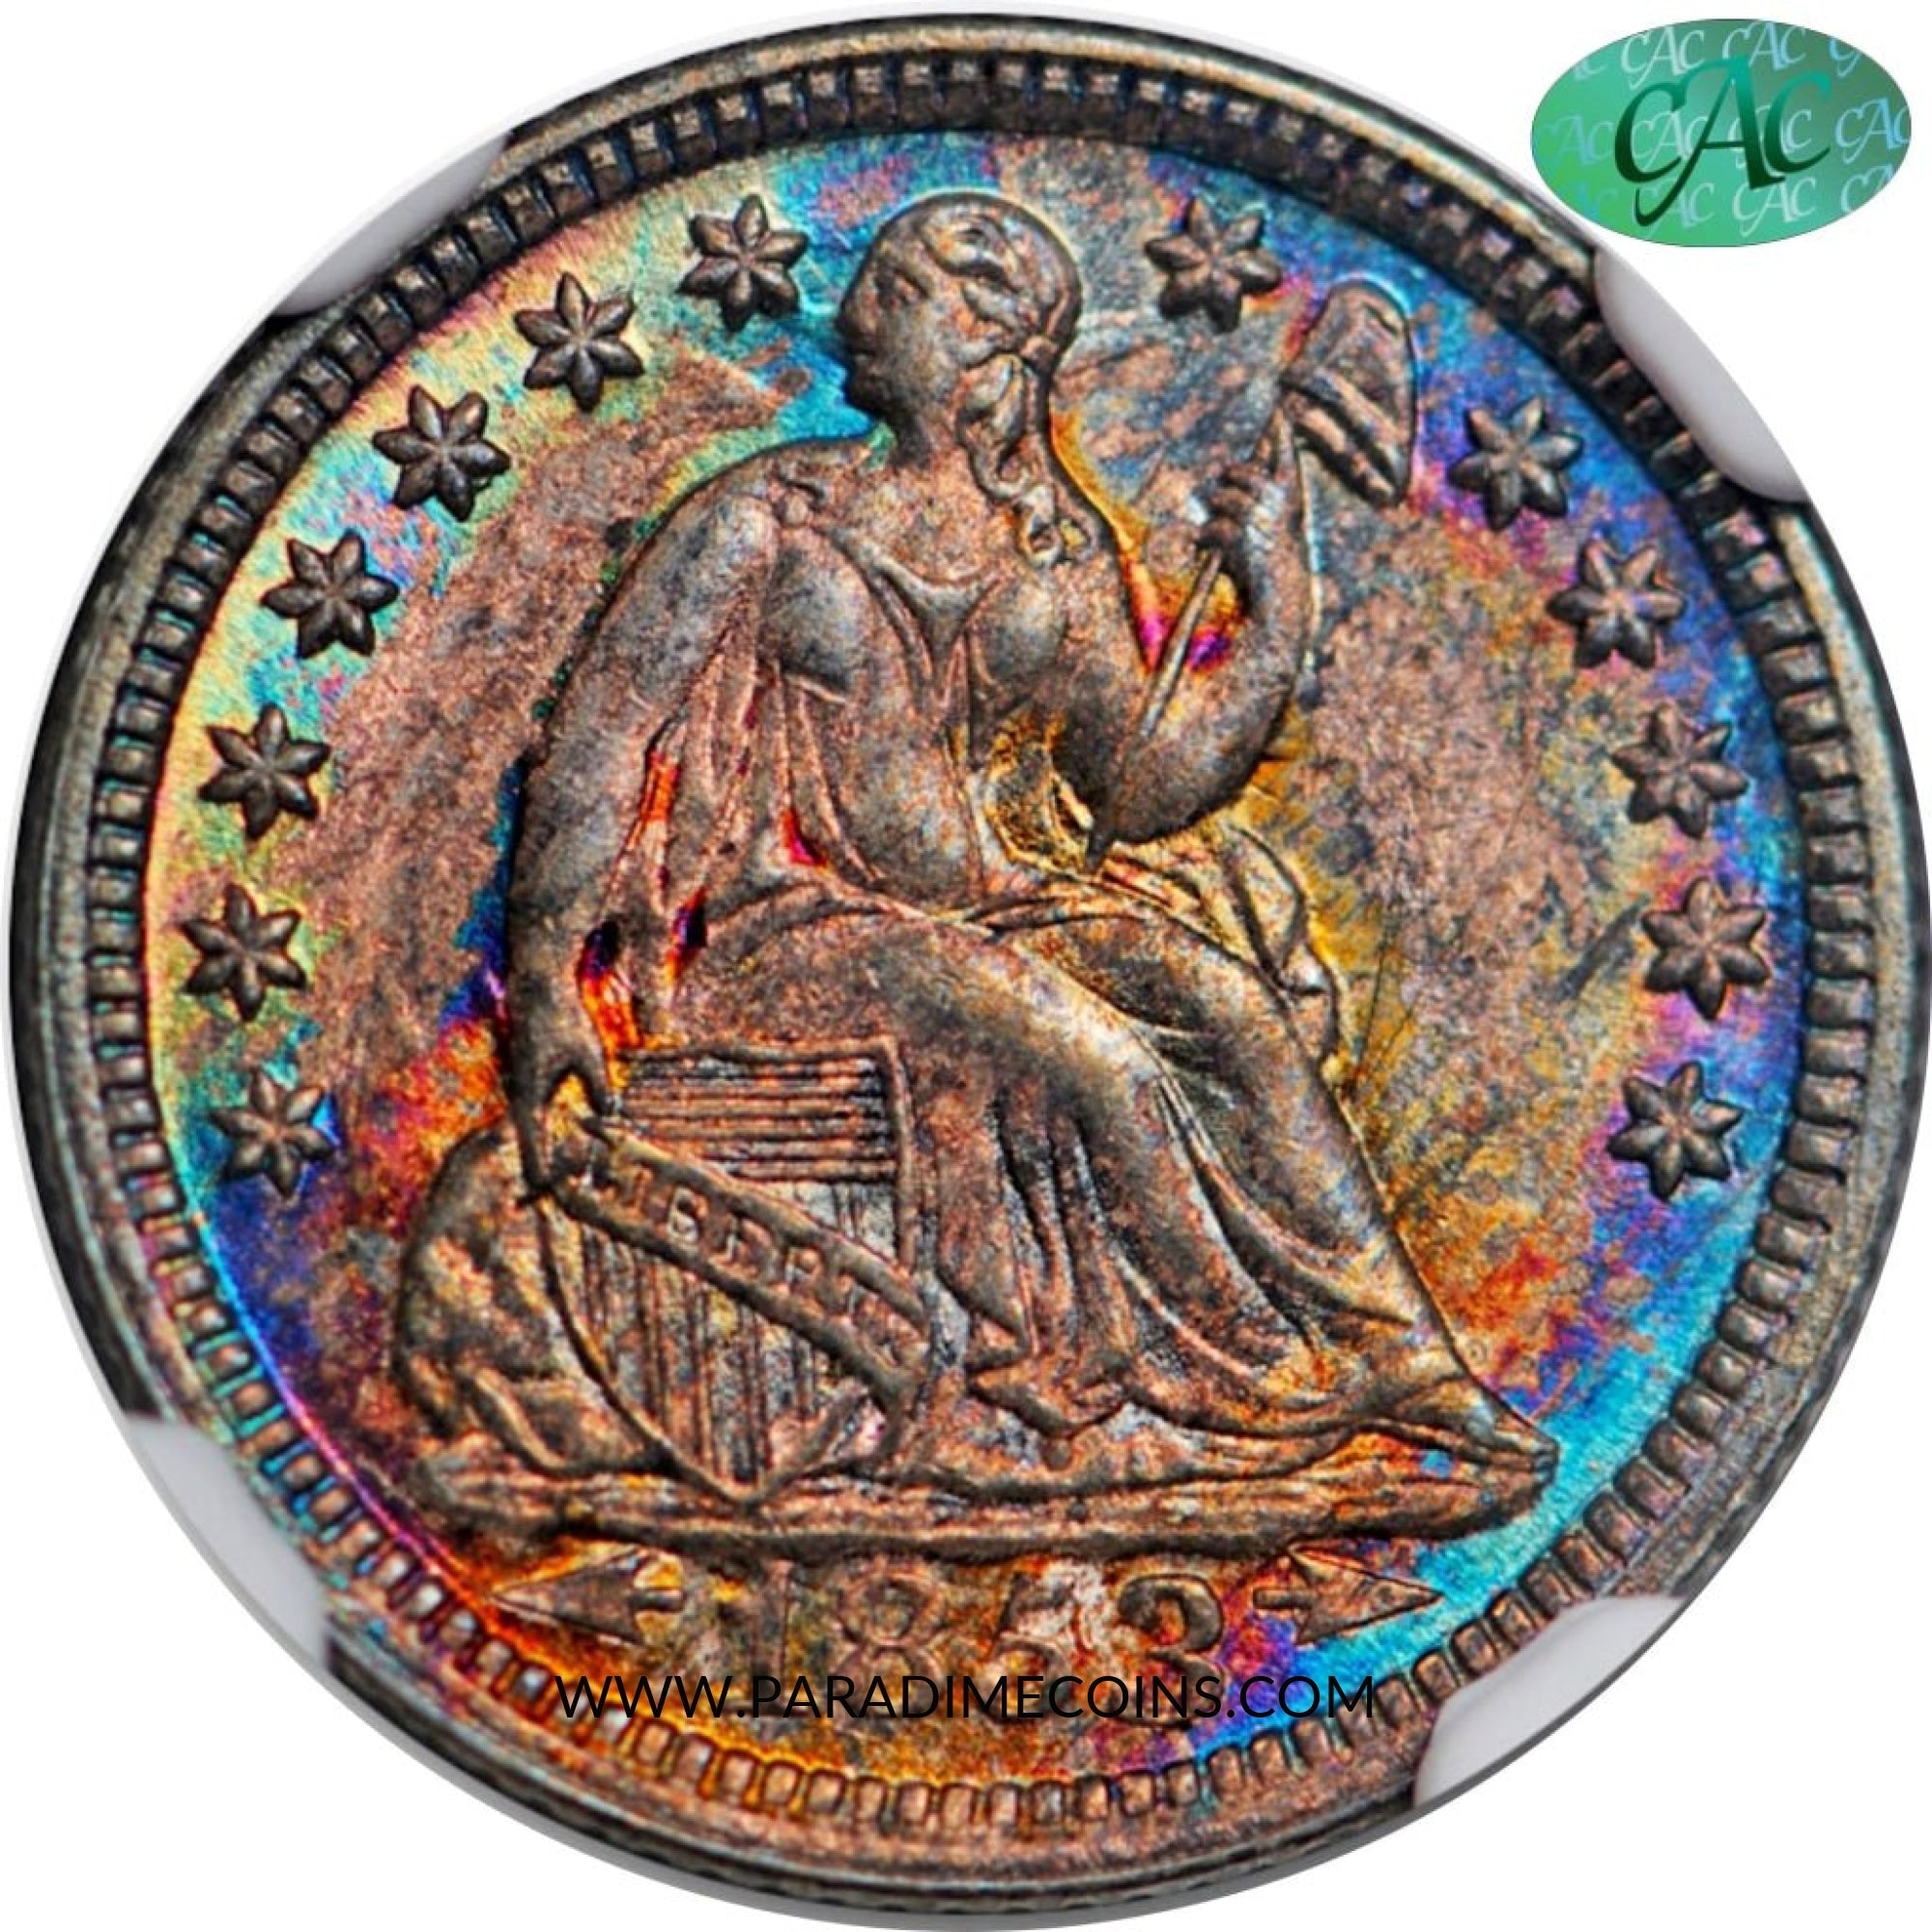 1853 H10C ARROWS MS65 NGC CAC - Paradime Coins | PCGS NGC CACG CAC Rare US Numismatic Coins For Sale